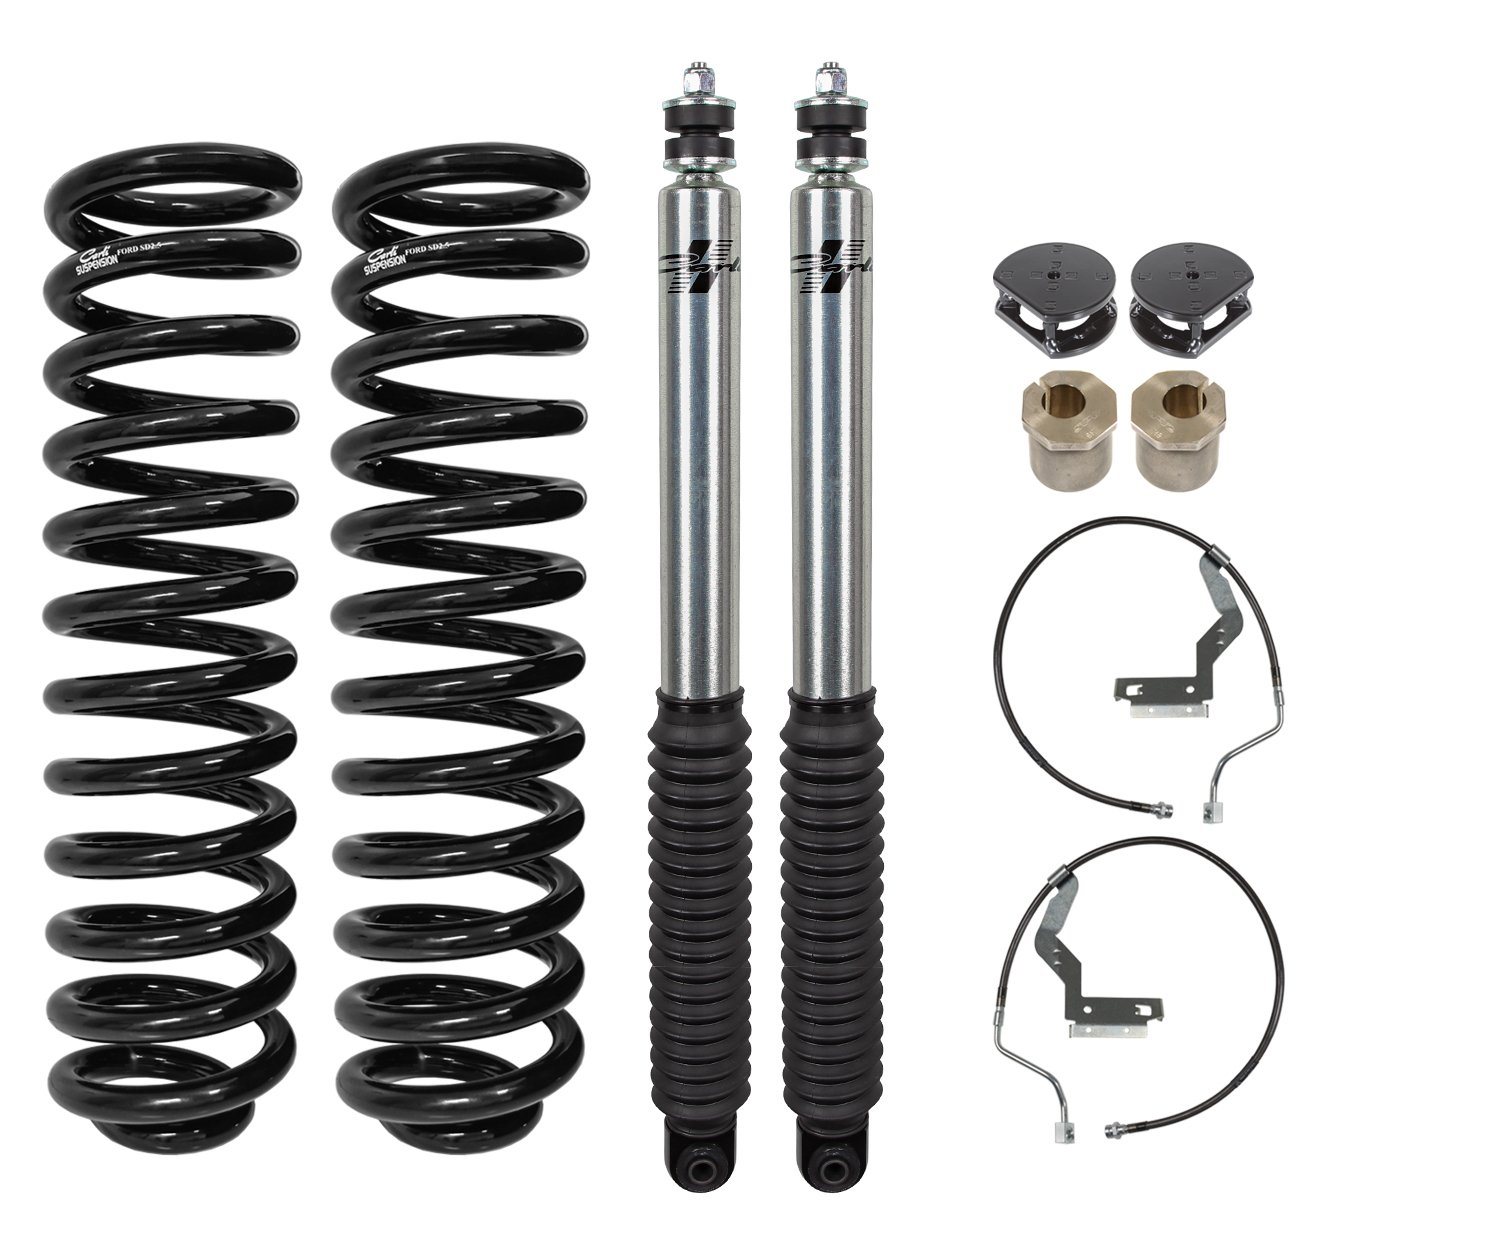 Carli Suspension Review: Elevate Your Ride Quality!